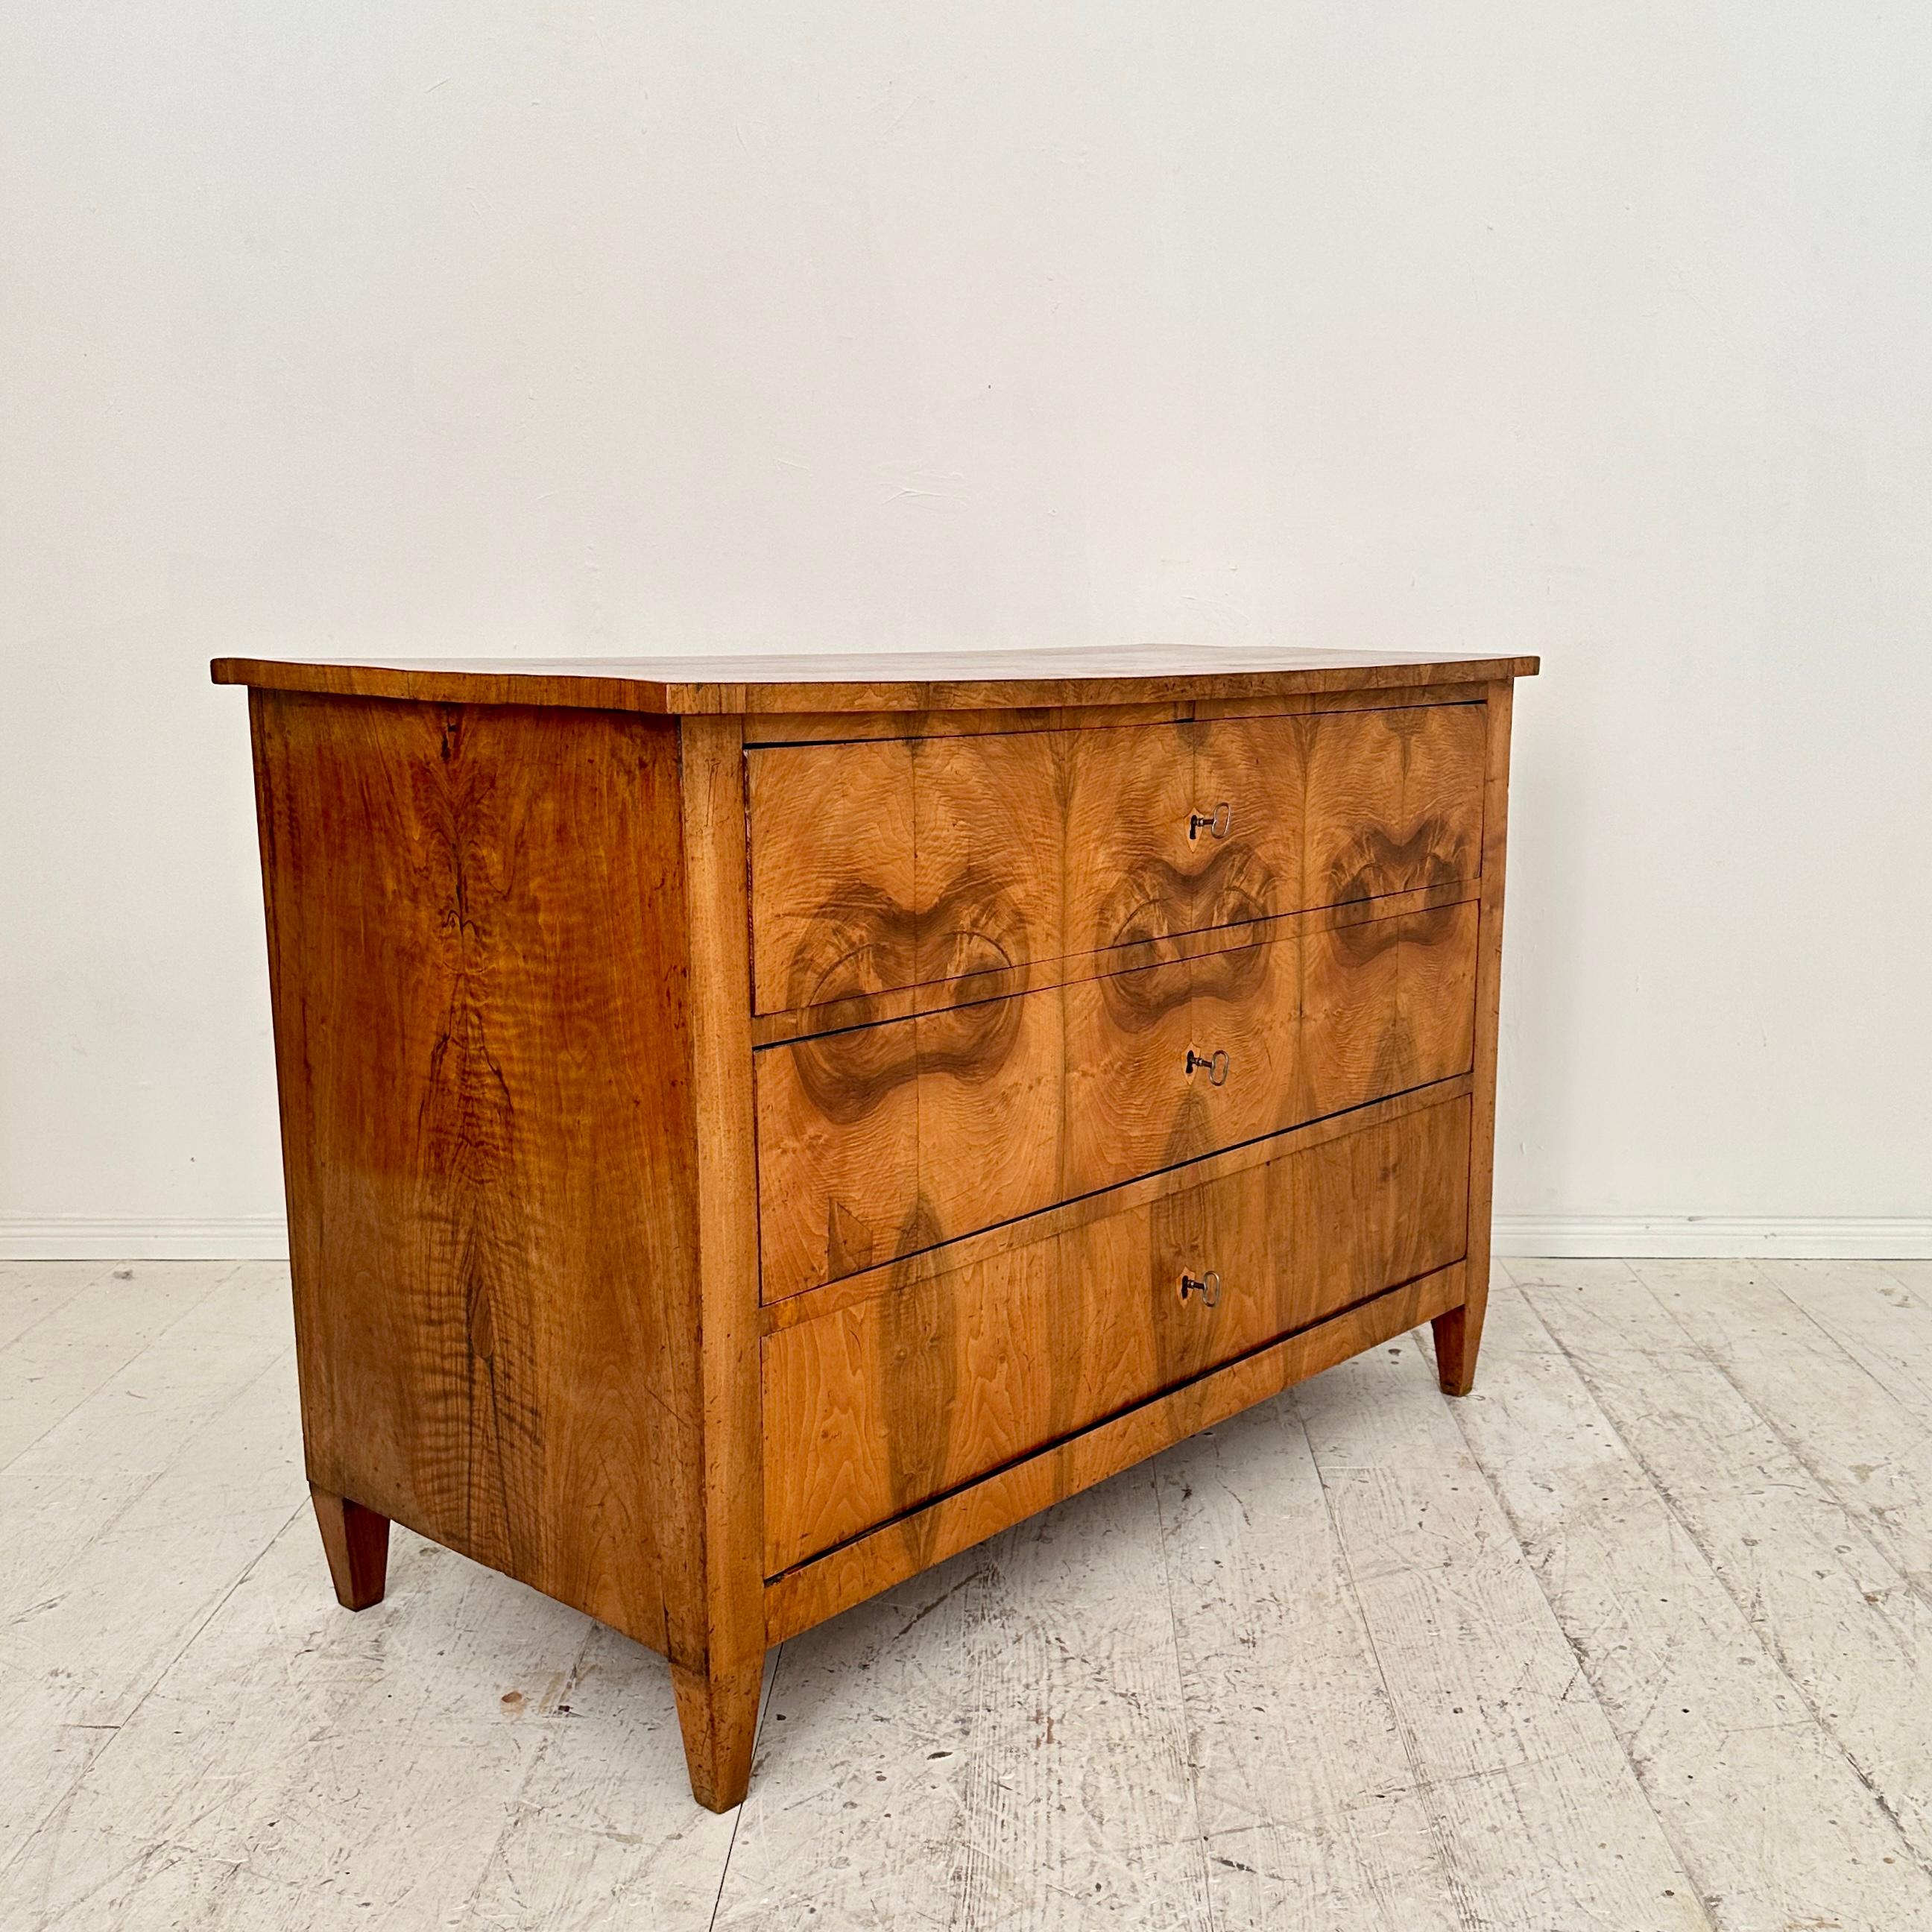 Crafted around 1820, the 19th Century German Biedermeier Chest of Drawers in Walnut with Three Drawers epitomizes the elegance and simplicity of the Biedermeier era. Made from rich walnut wood, this chest exudes a timeless charm, reflecting the